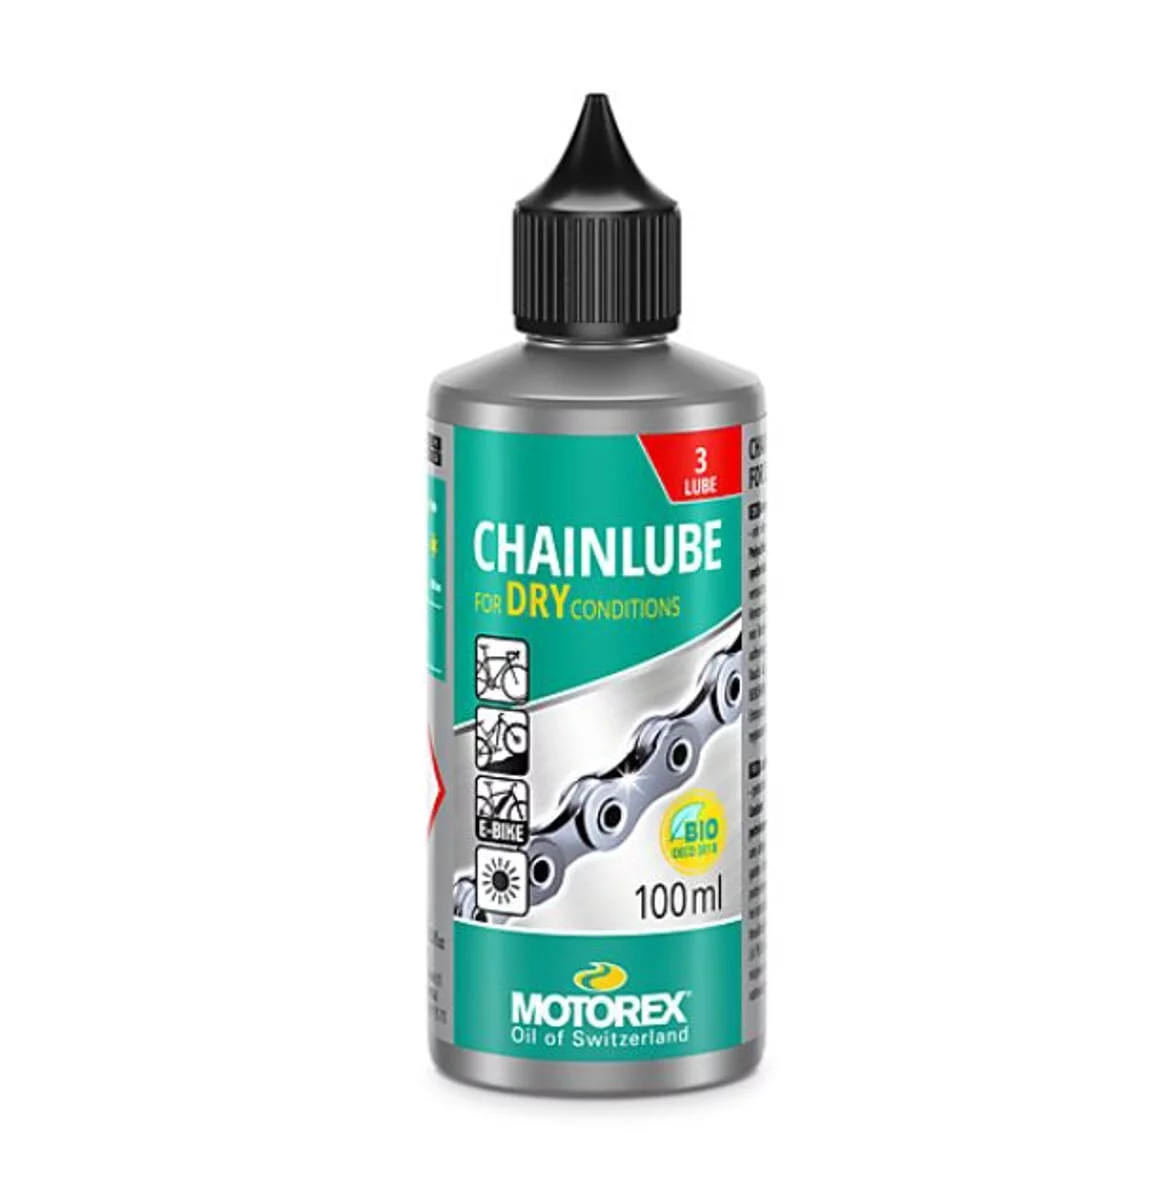 Motorex Chainlube for Dry Conditions